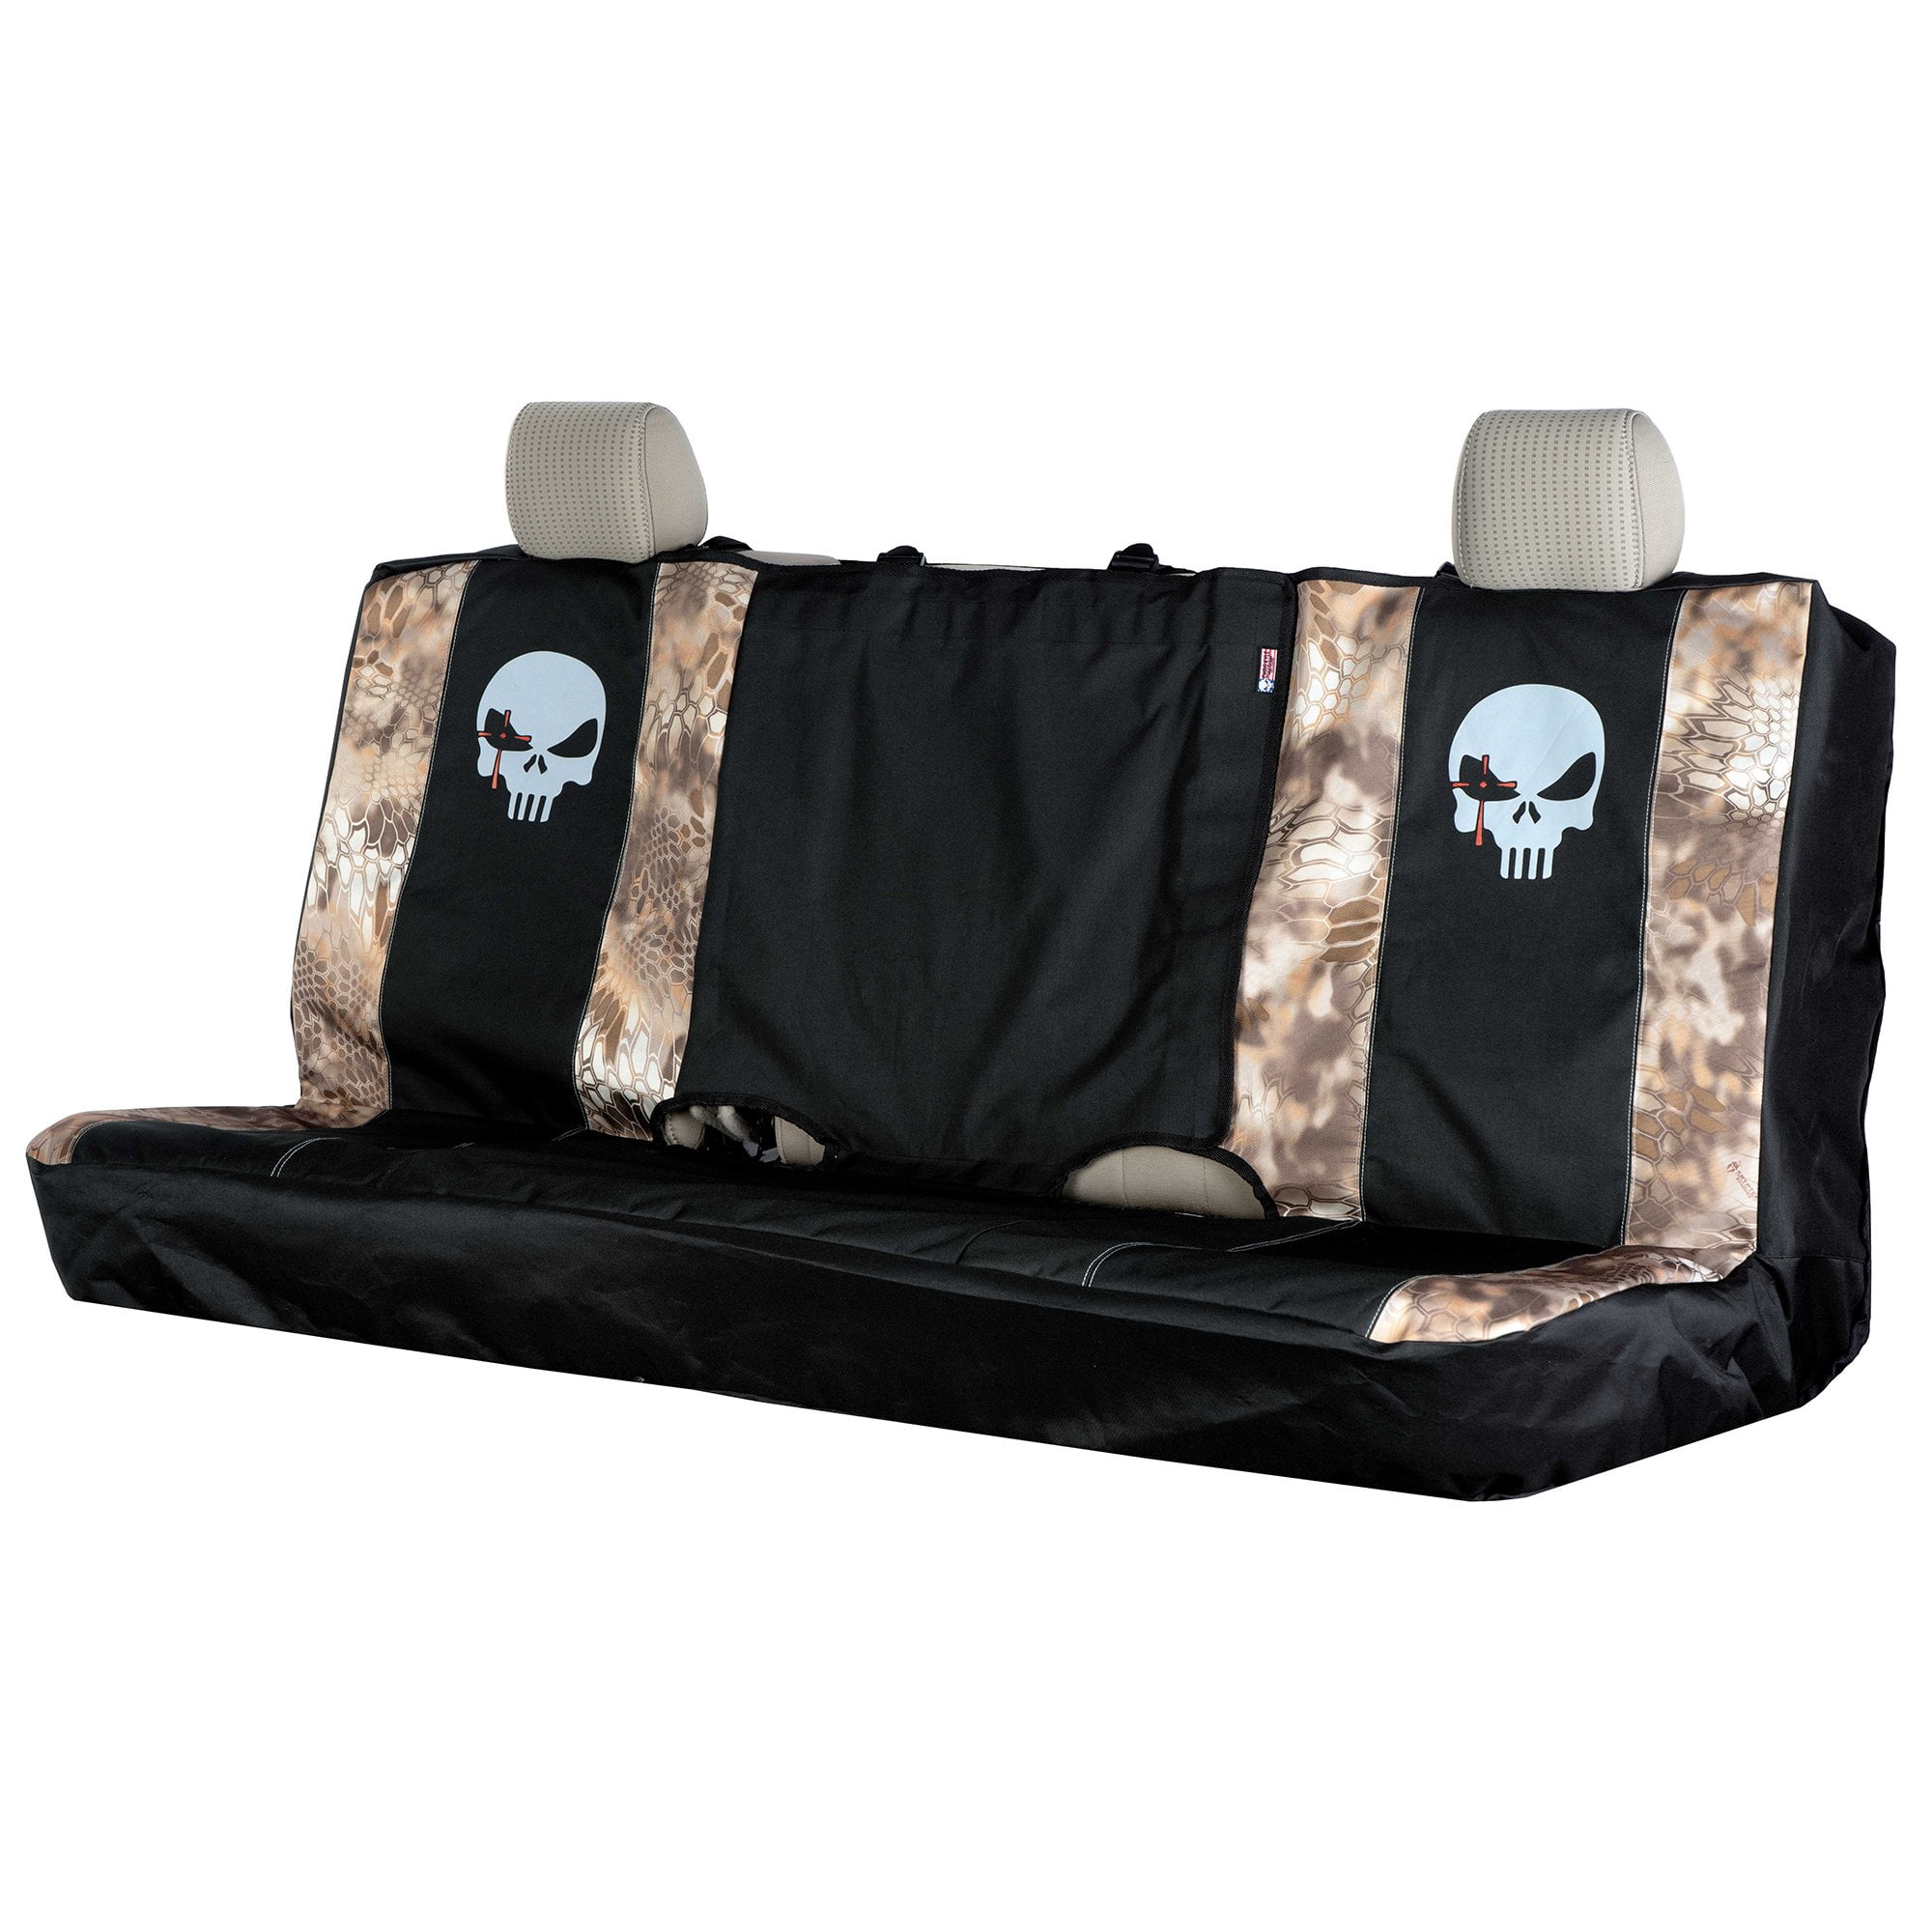 Chris Kyle American Sniper Seat Covers 